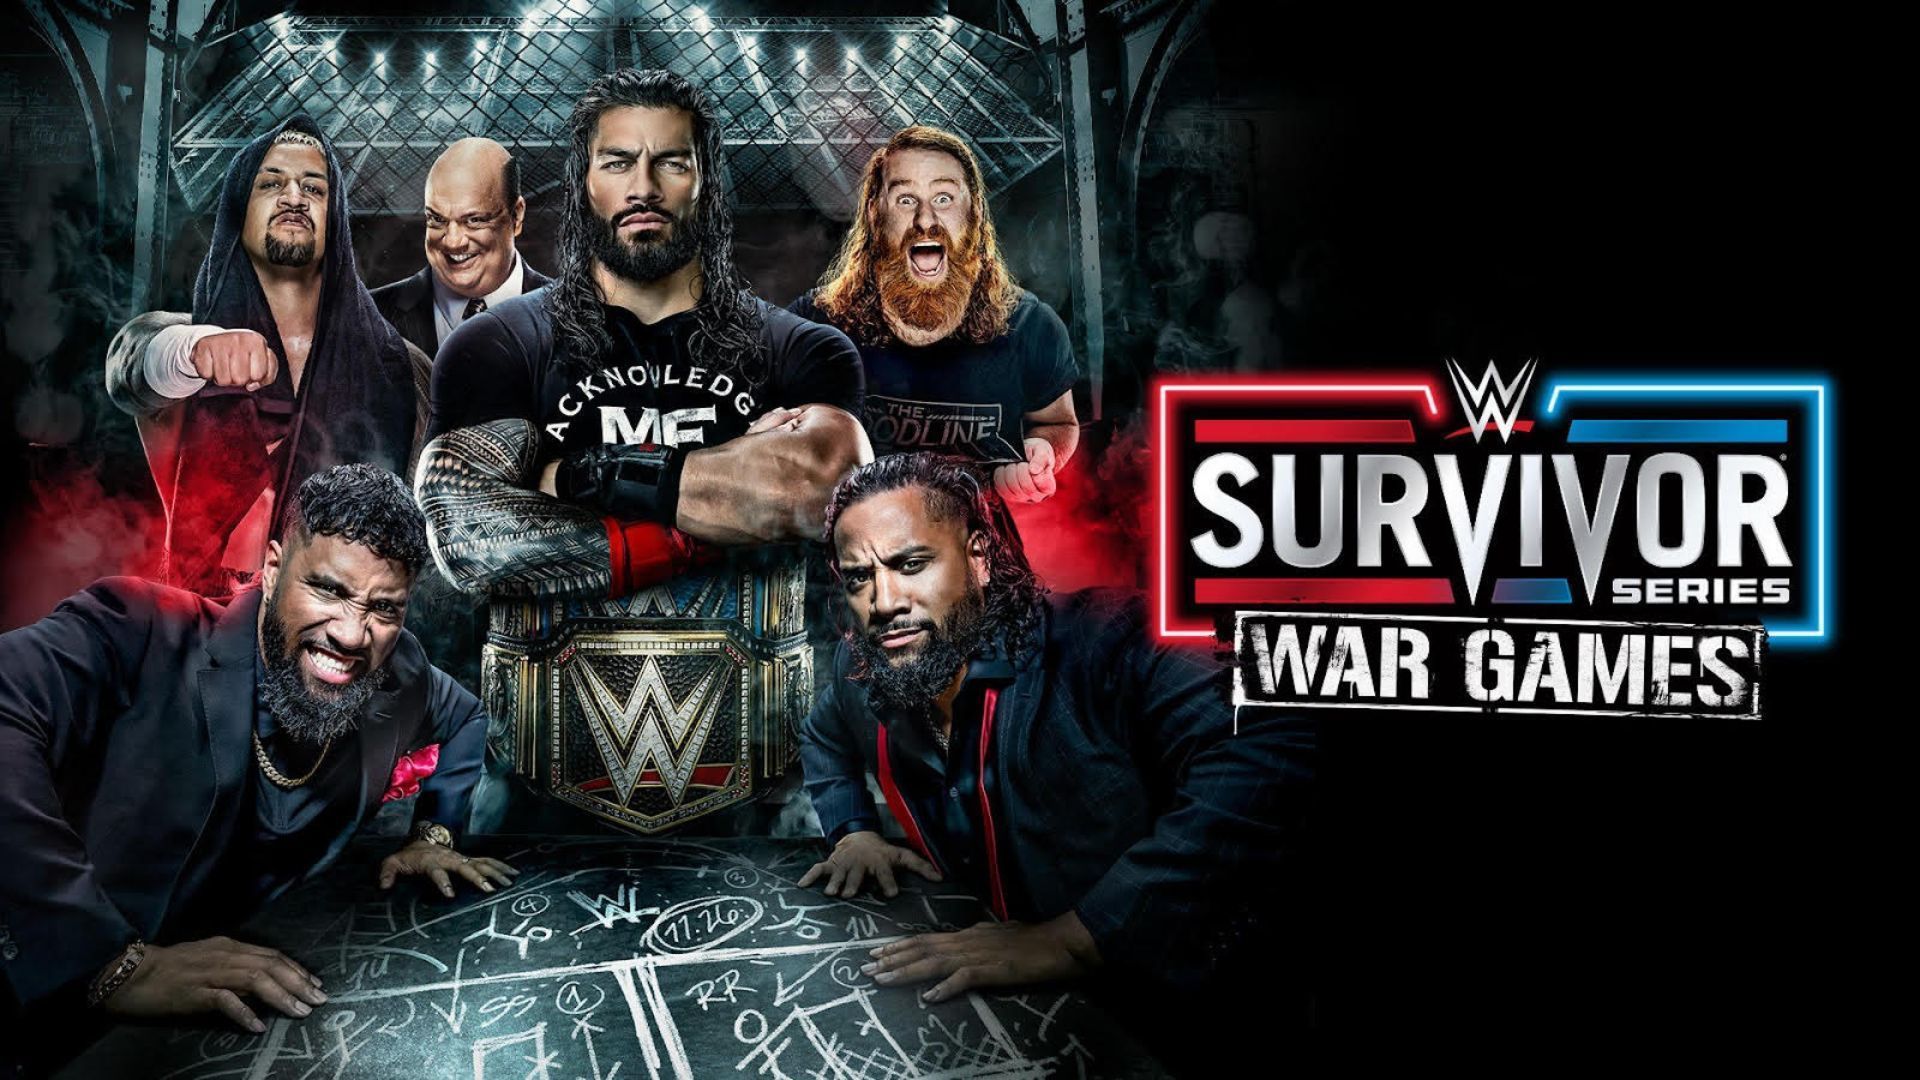 WWE Survivor Series: WarGames set to bring a historic year for WWE to a close.